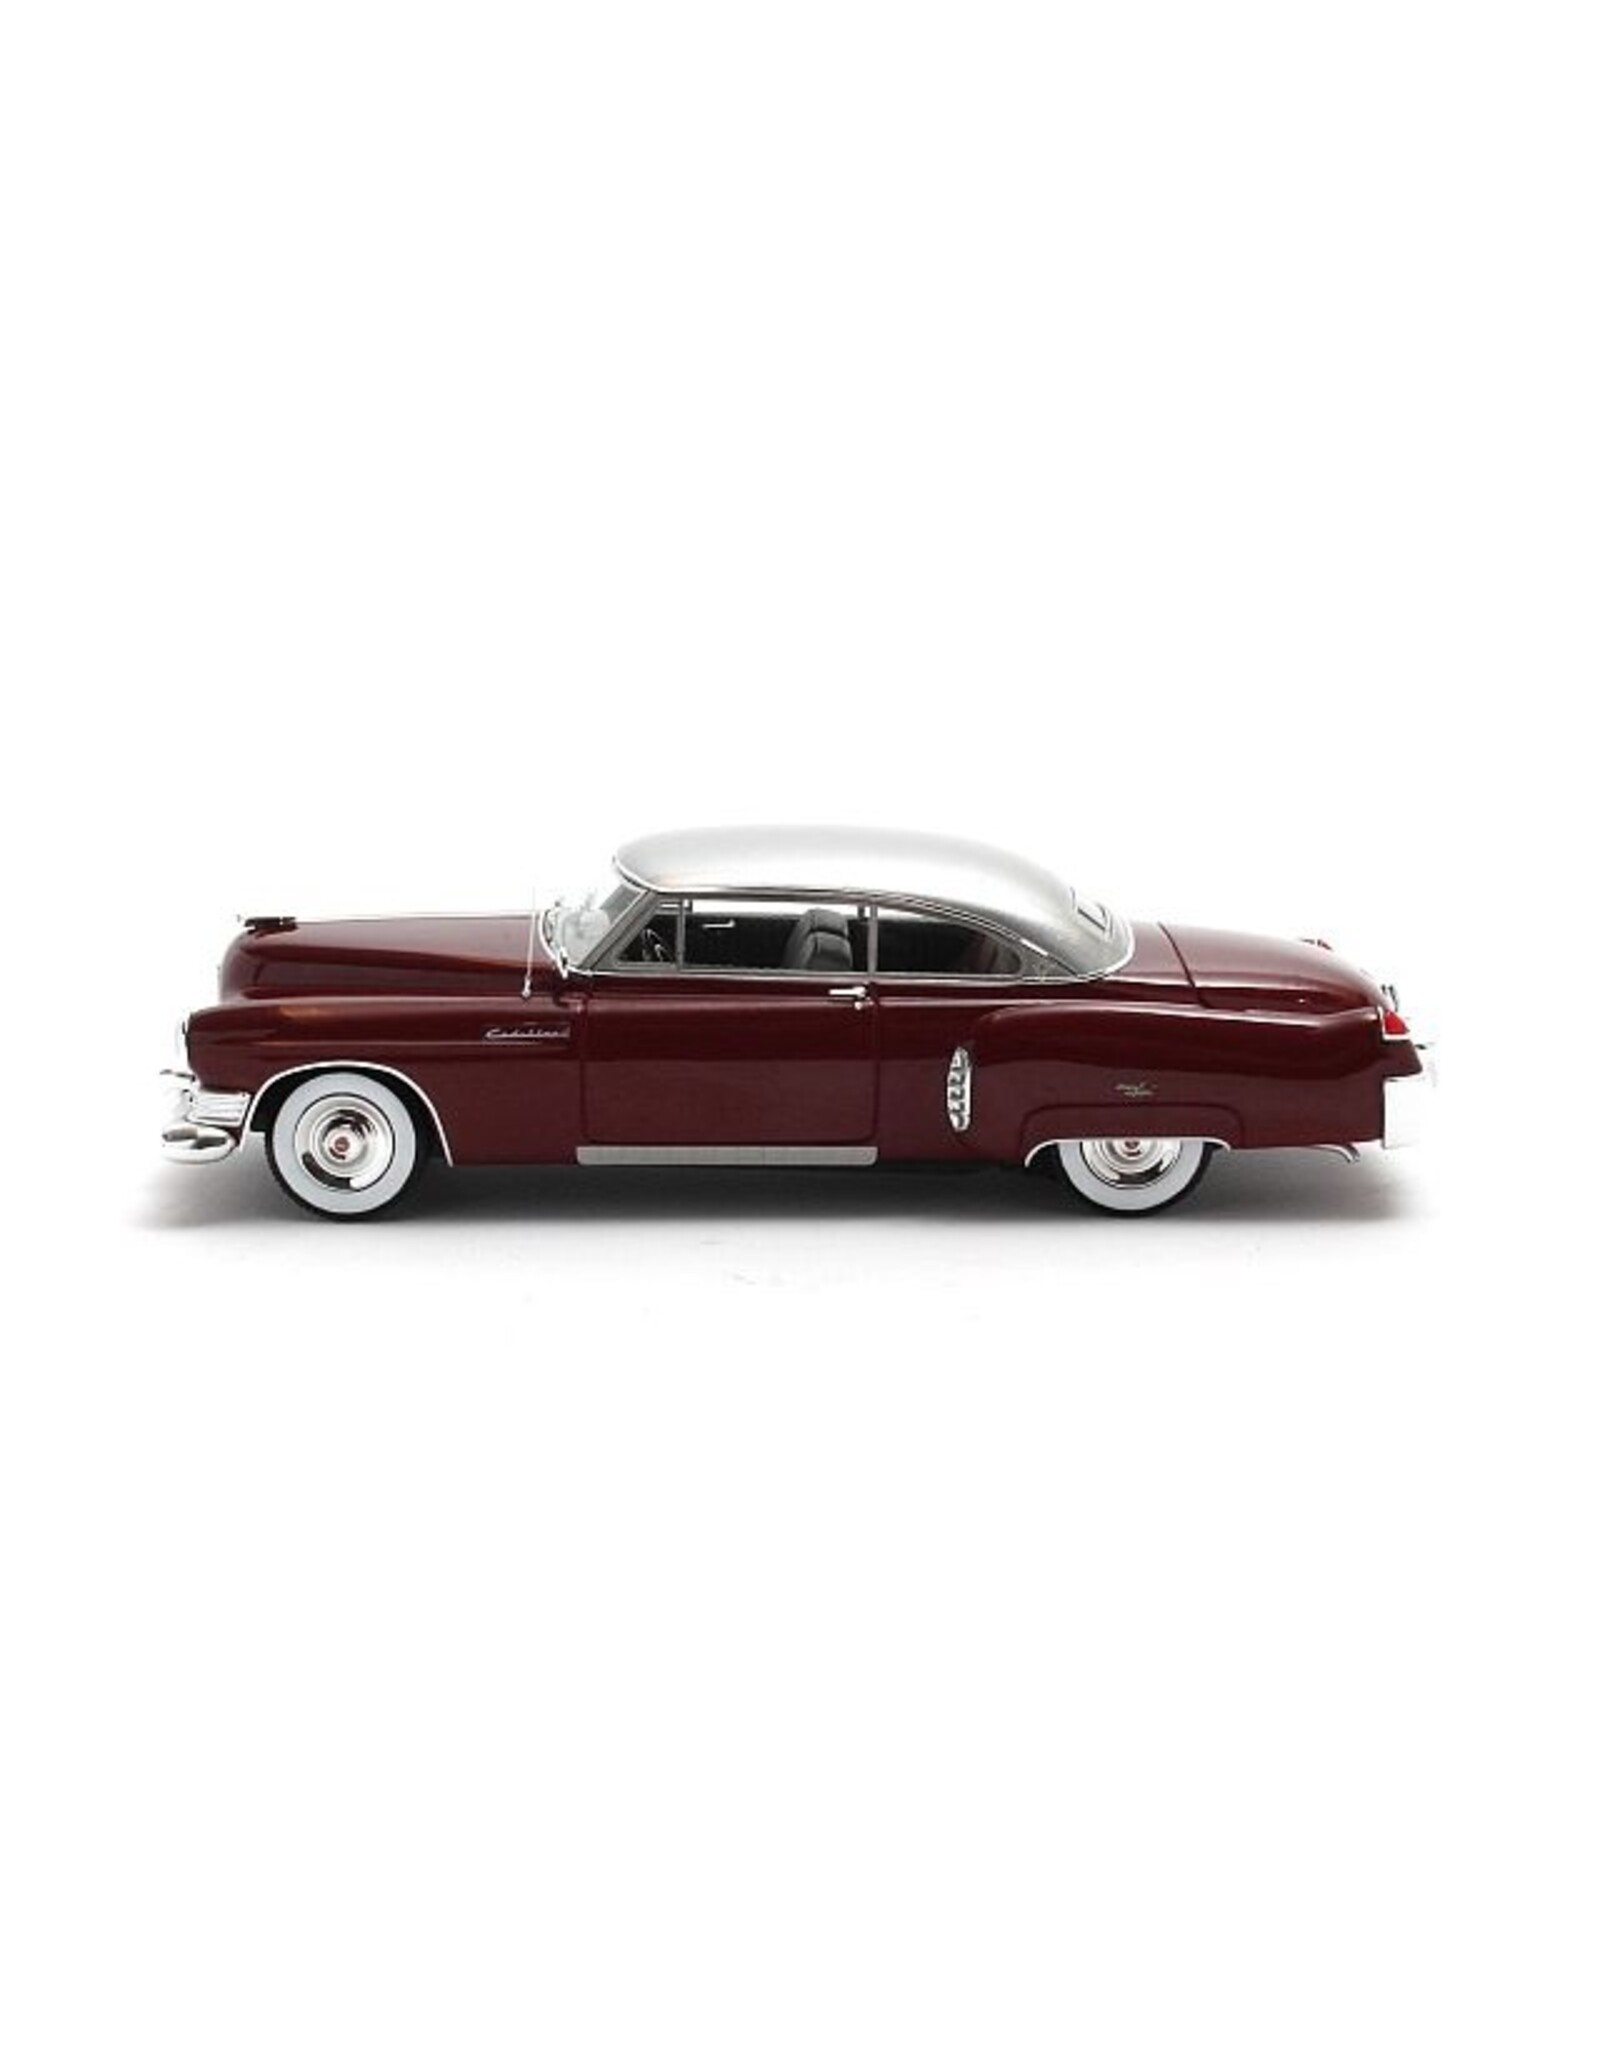 Cadillac(General Motors) Cadillac Coupe Deville Show Car(1949)grey/red metallic